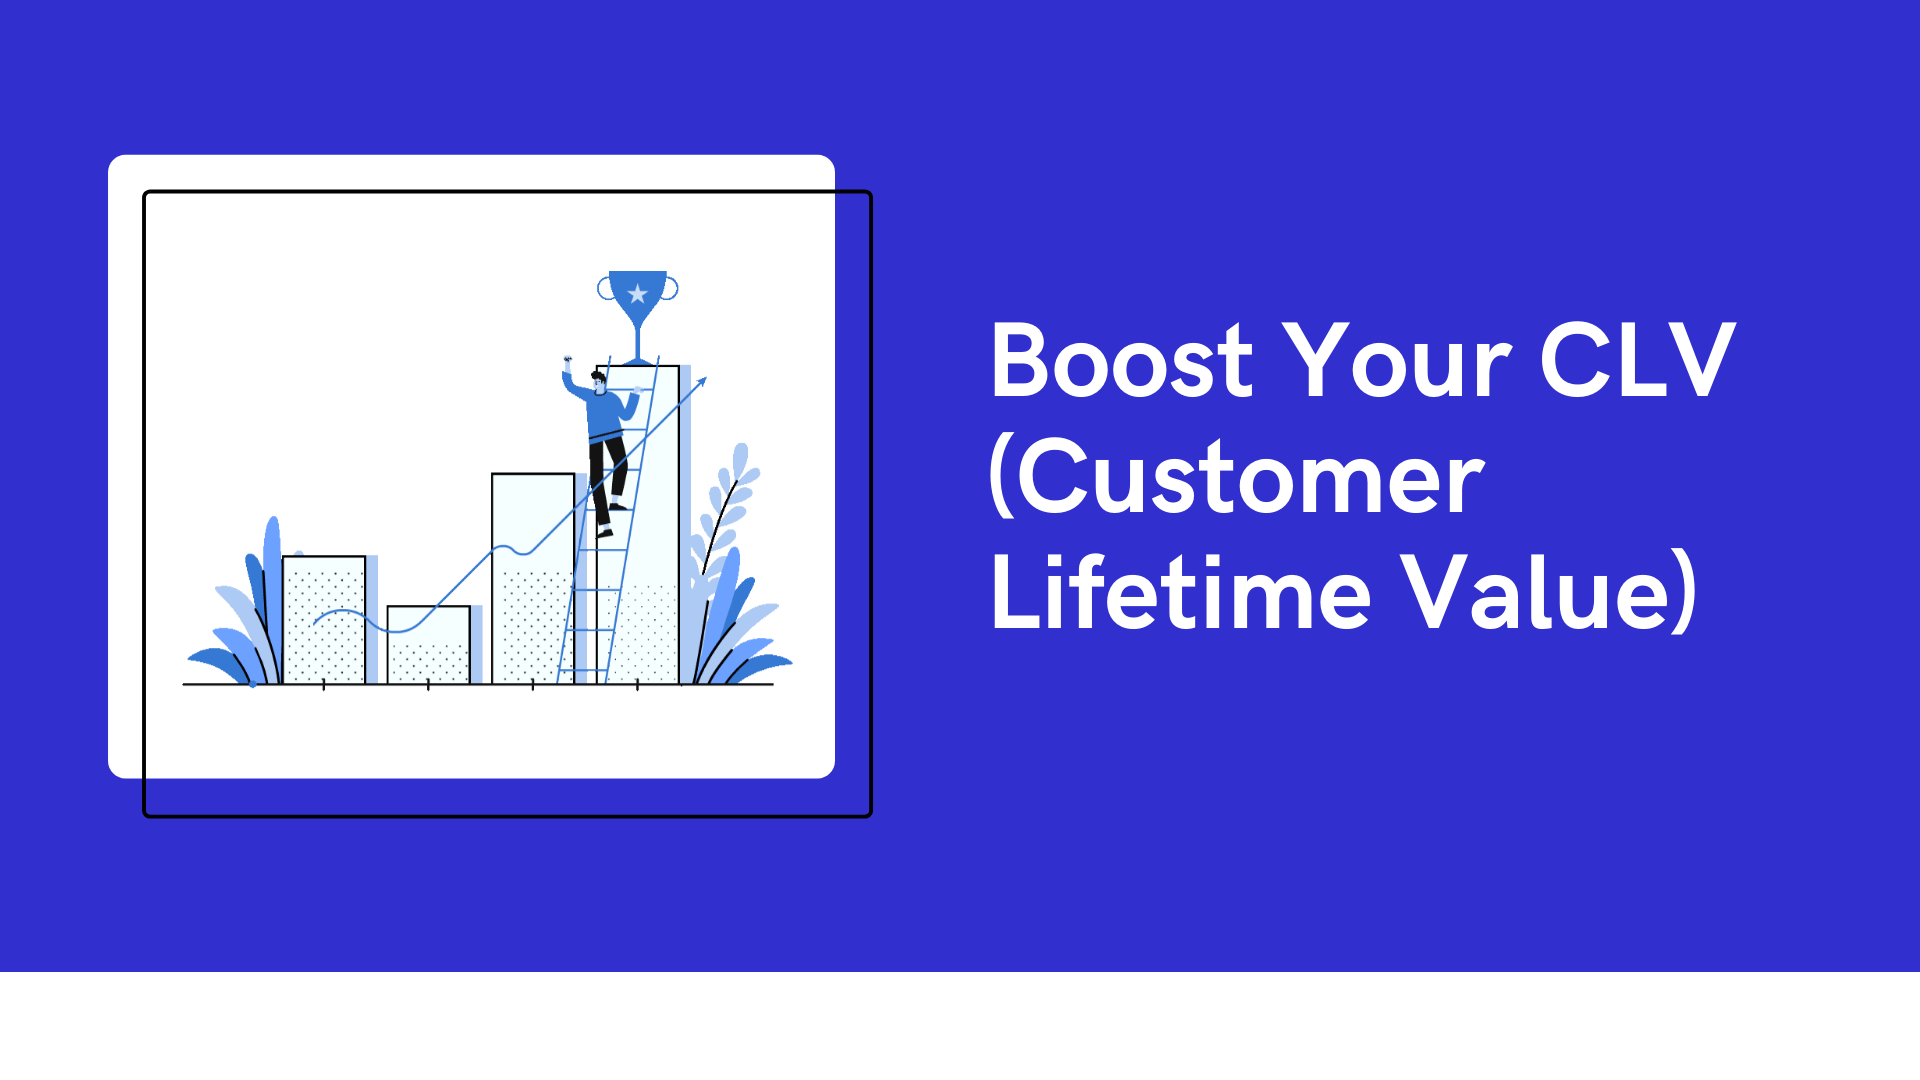 Boost Your CLV (Customer Lifetime Value)